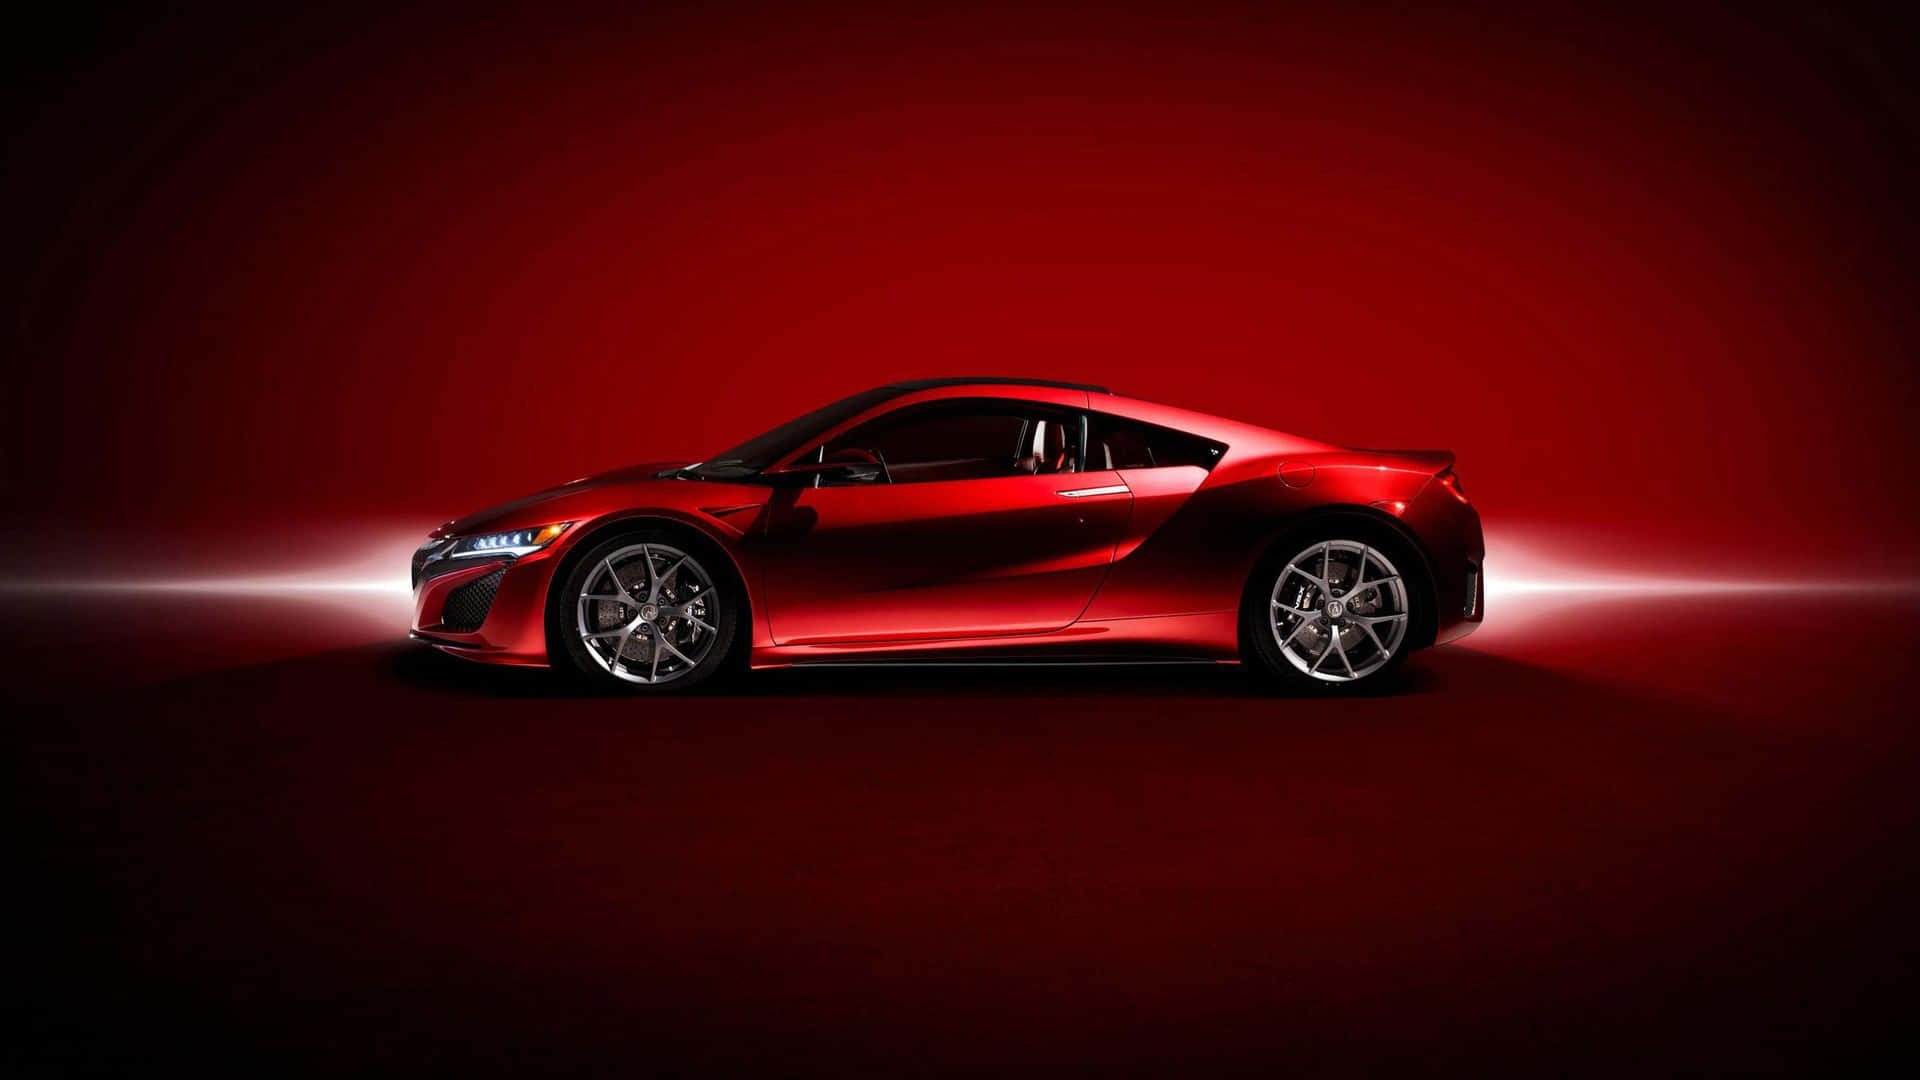 Stunning Red Acura NSX in Action Wallpaper